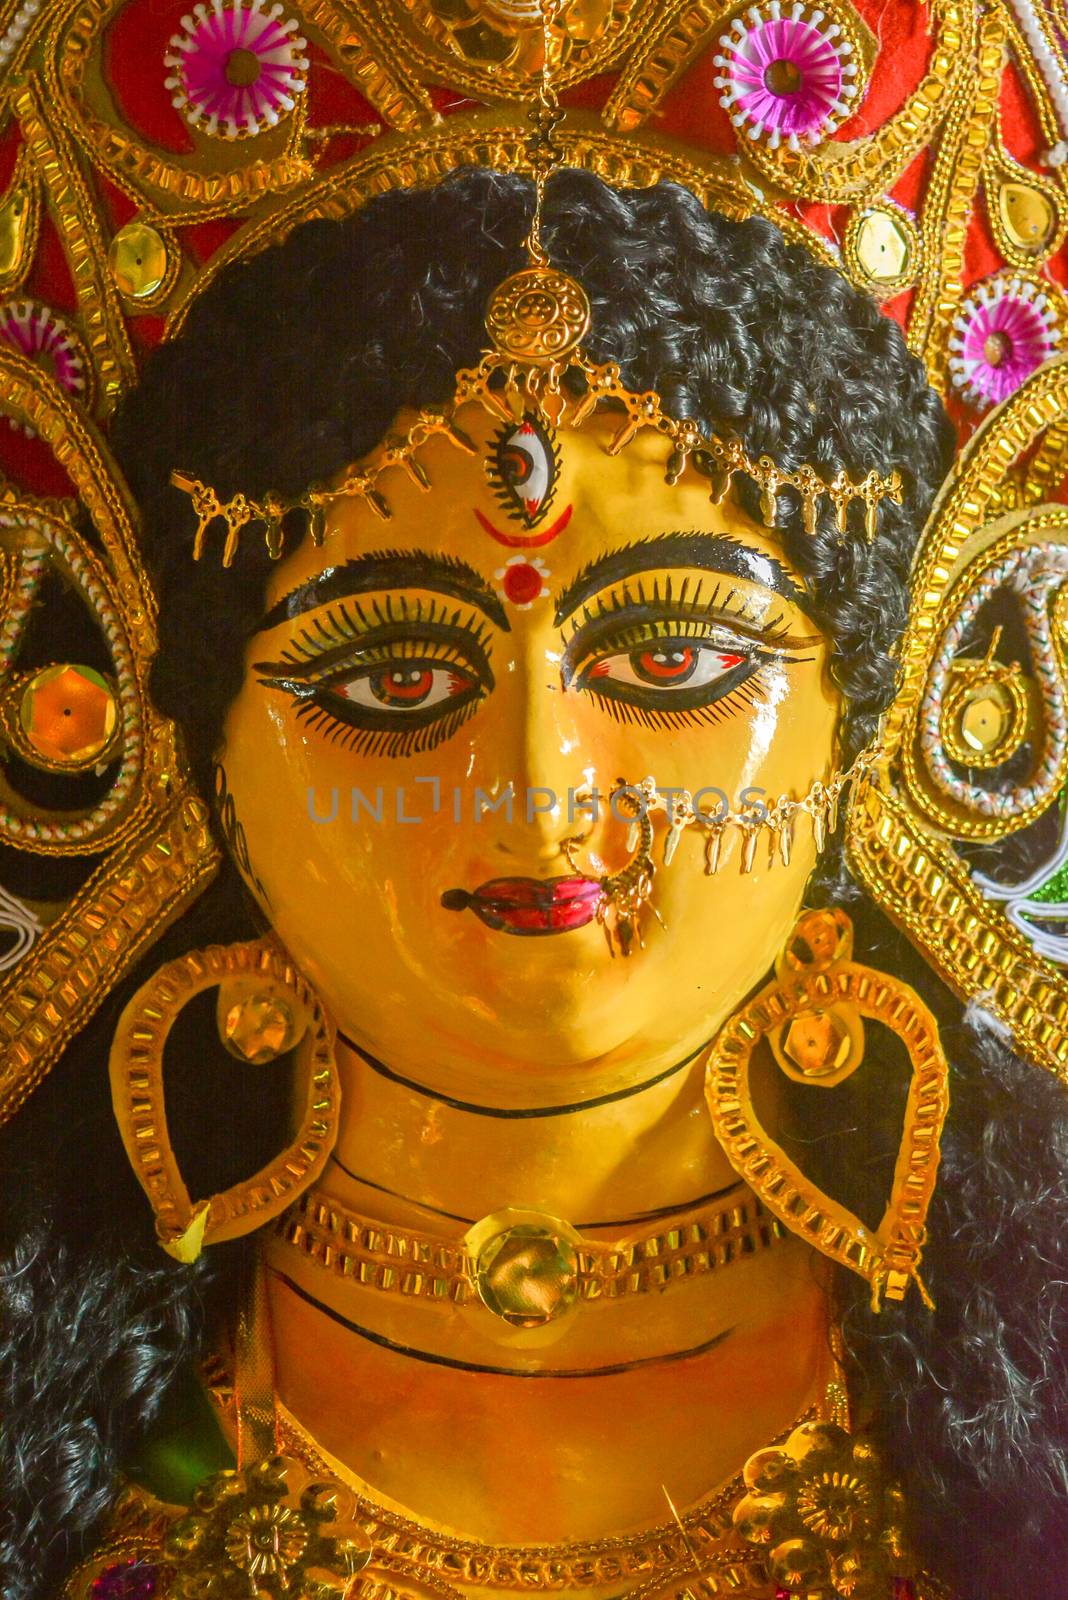 A close up face of Goddess Maa Durga Idol. A symbol of strength and power as per Hinduism. This portrait was taken during Durga Puja celebrations at a potter's studio in Kumartuli in Kolkata. by sudiptabhowmick